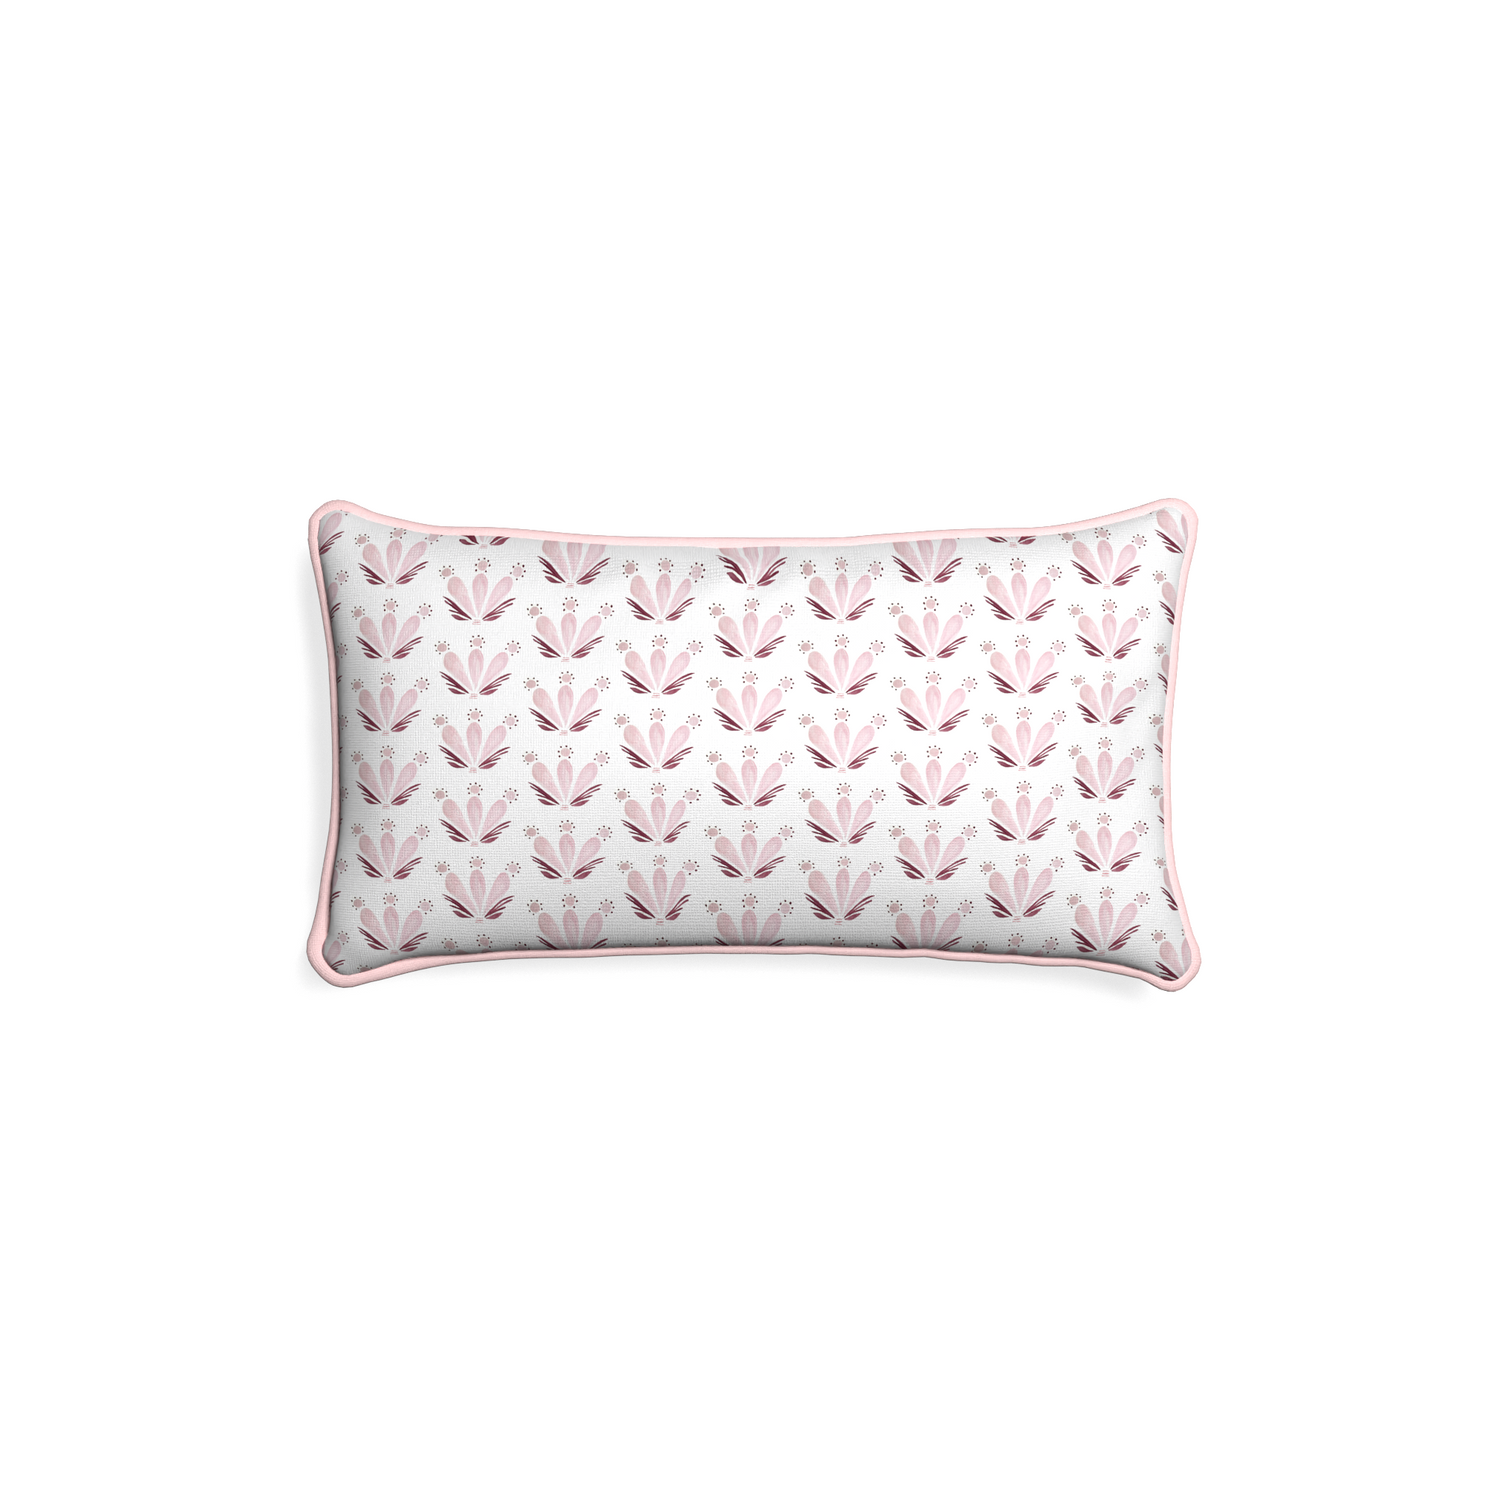 Petite-lumbar serena pink custom pink & burgundy drop repeat floralpillow with petal piping on white background